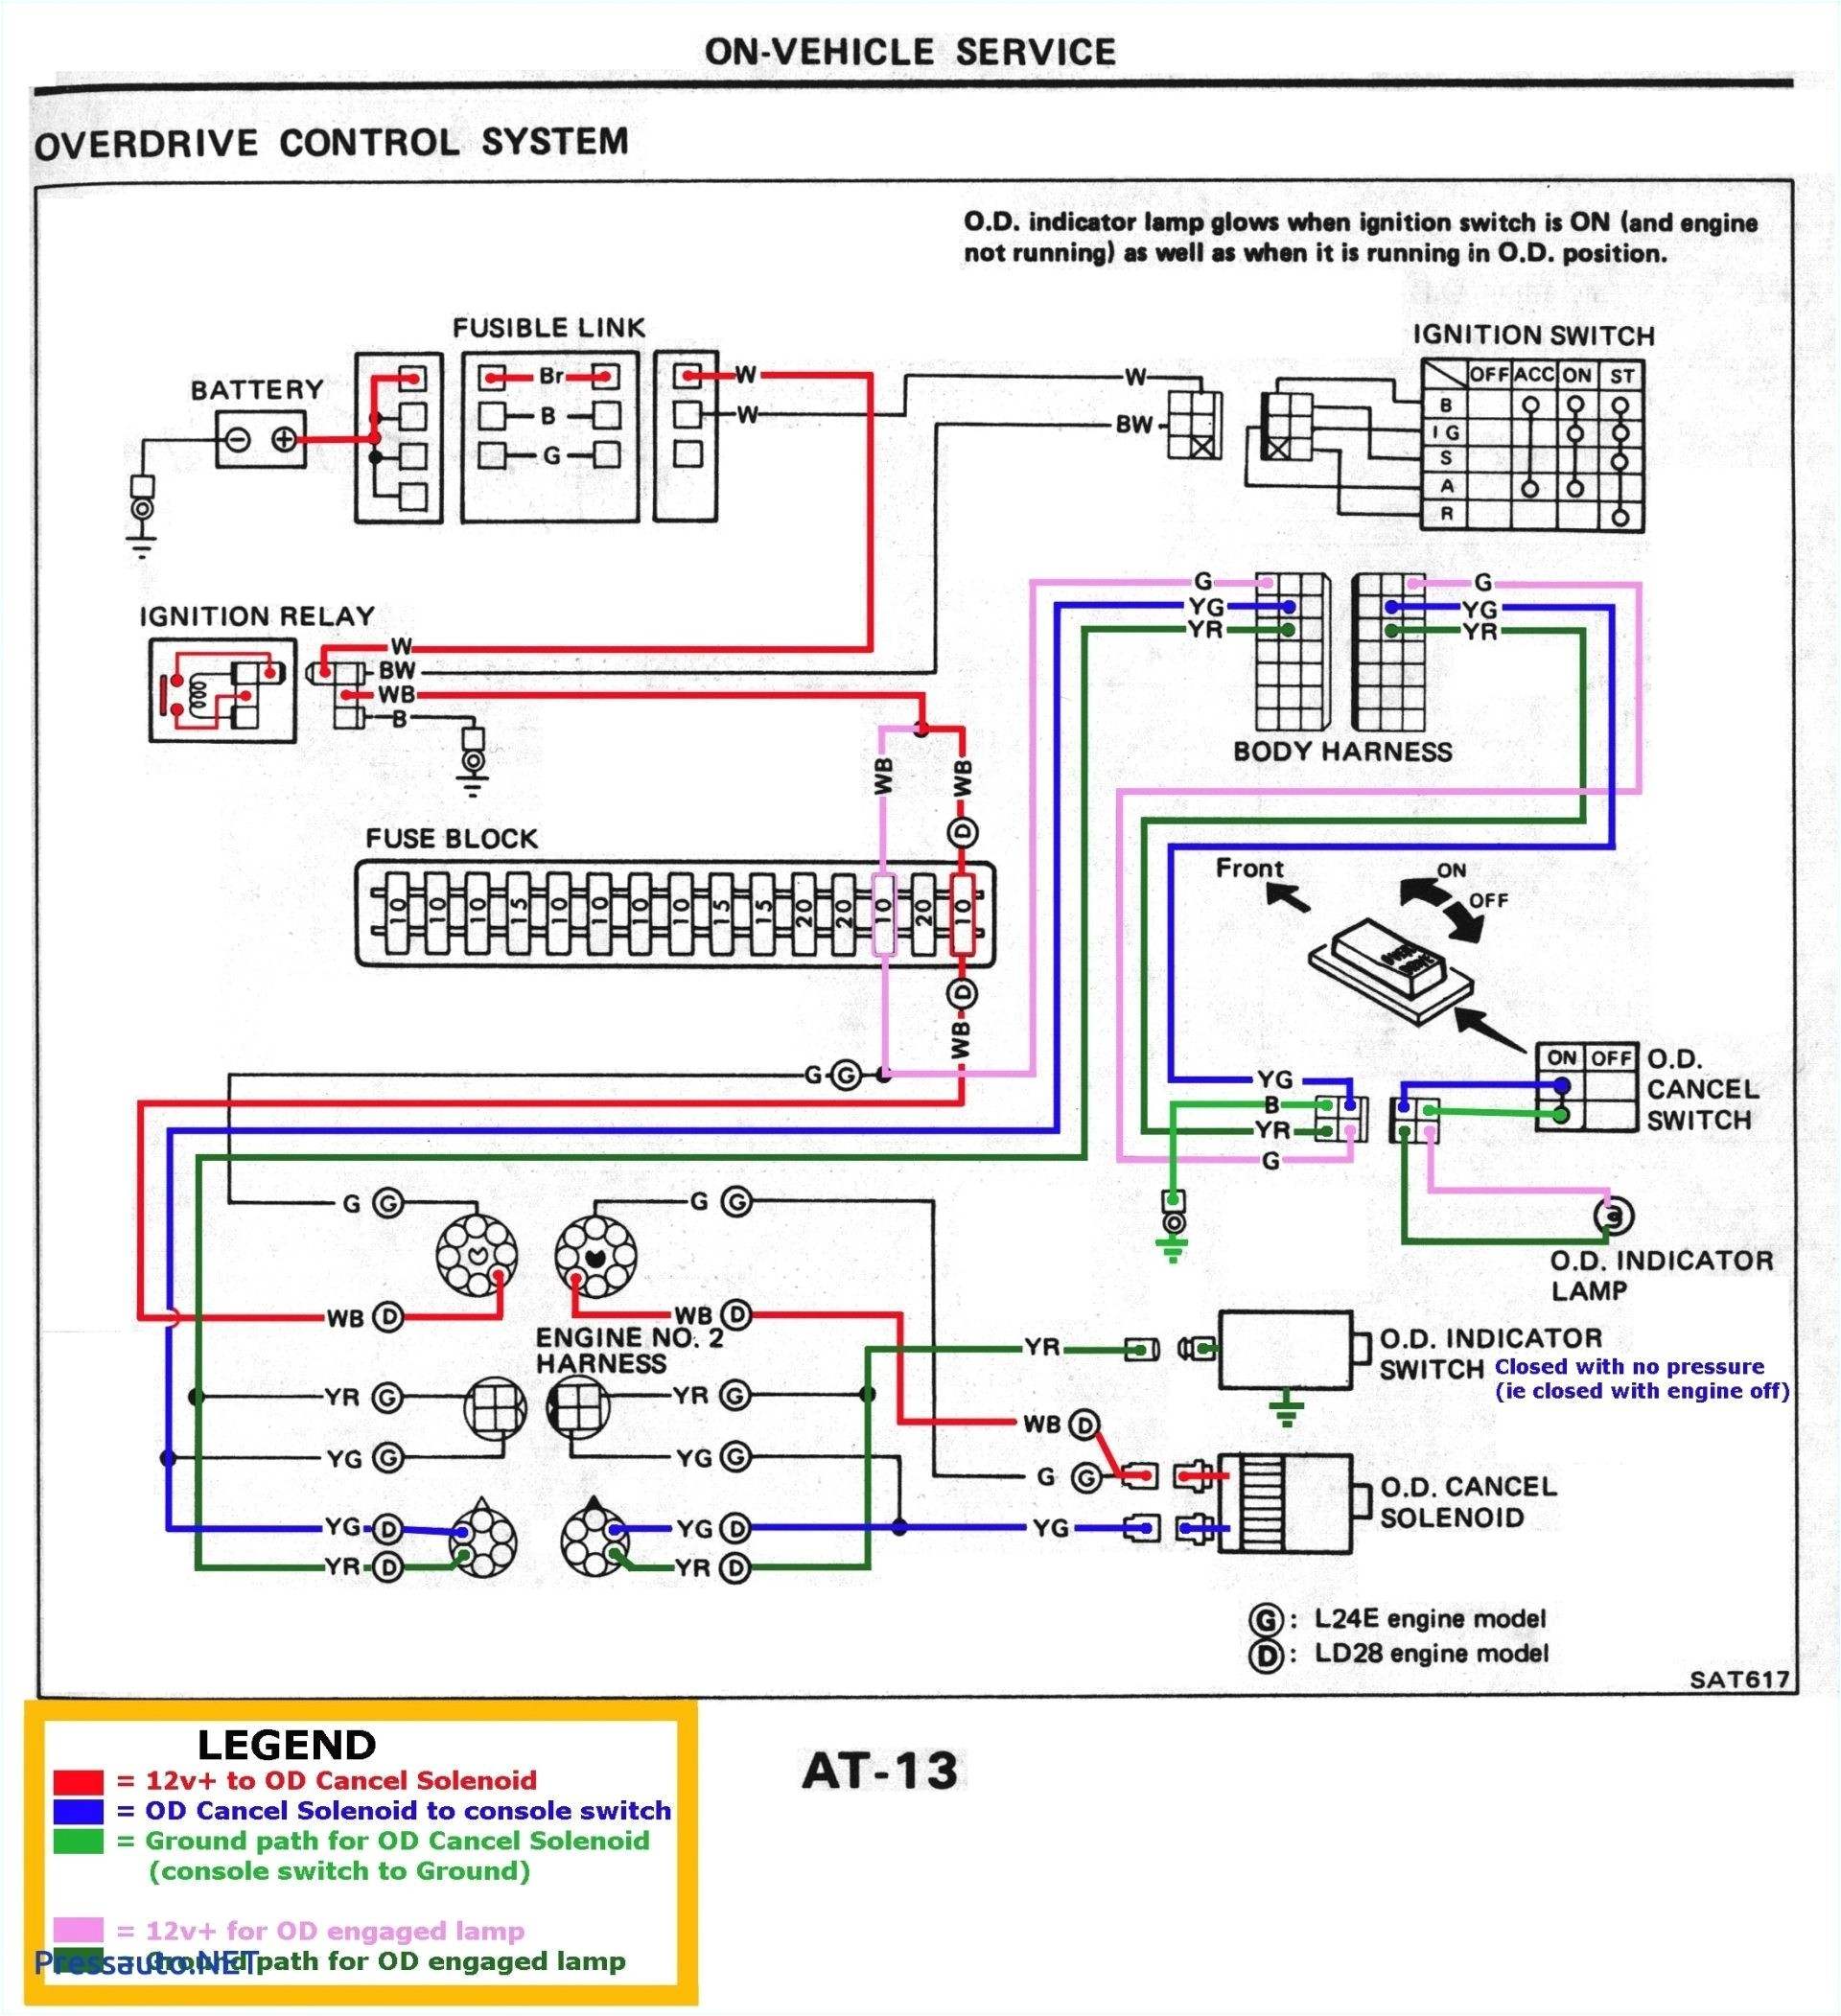 wiring a dimmer switch uk diagram new wiring diagram for two way light switch uk valid generator jpg